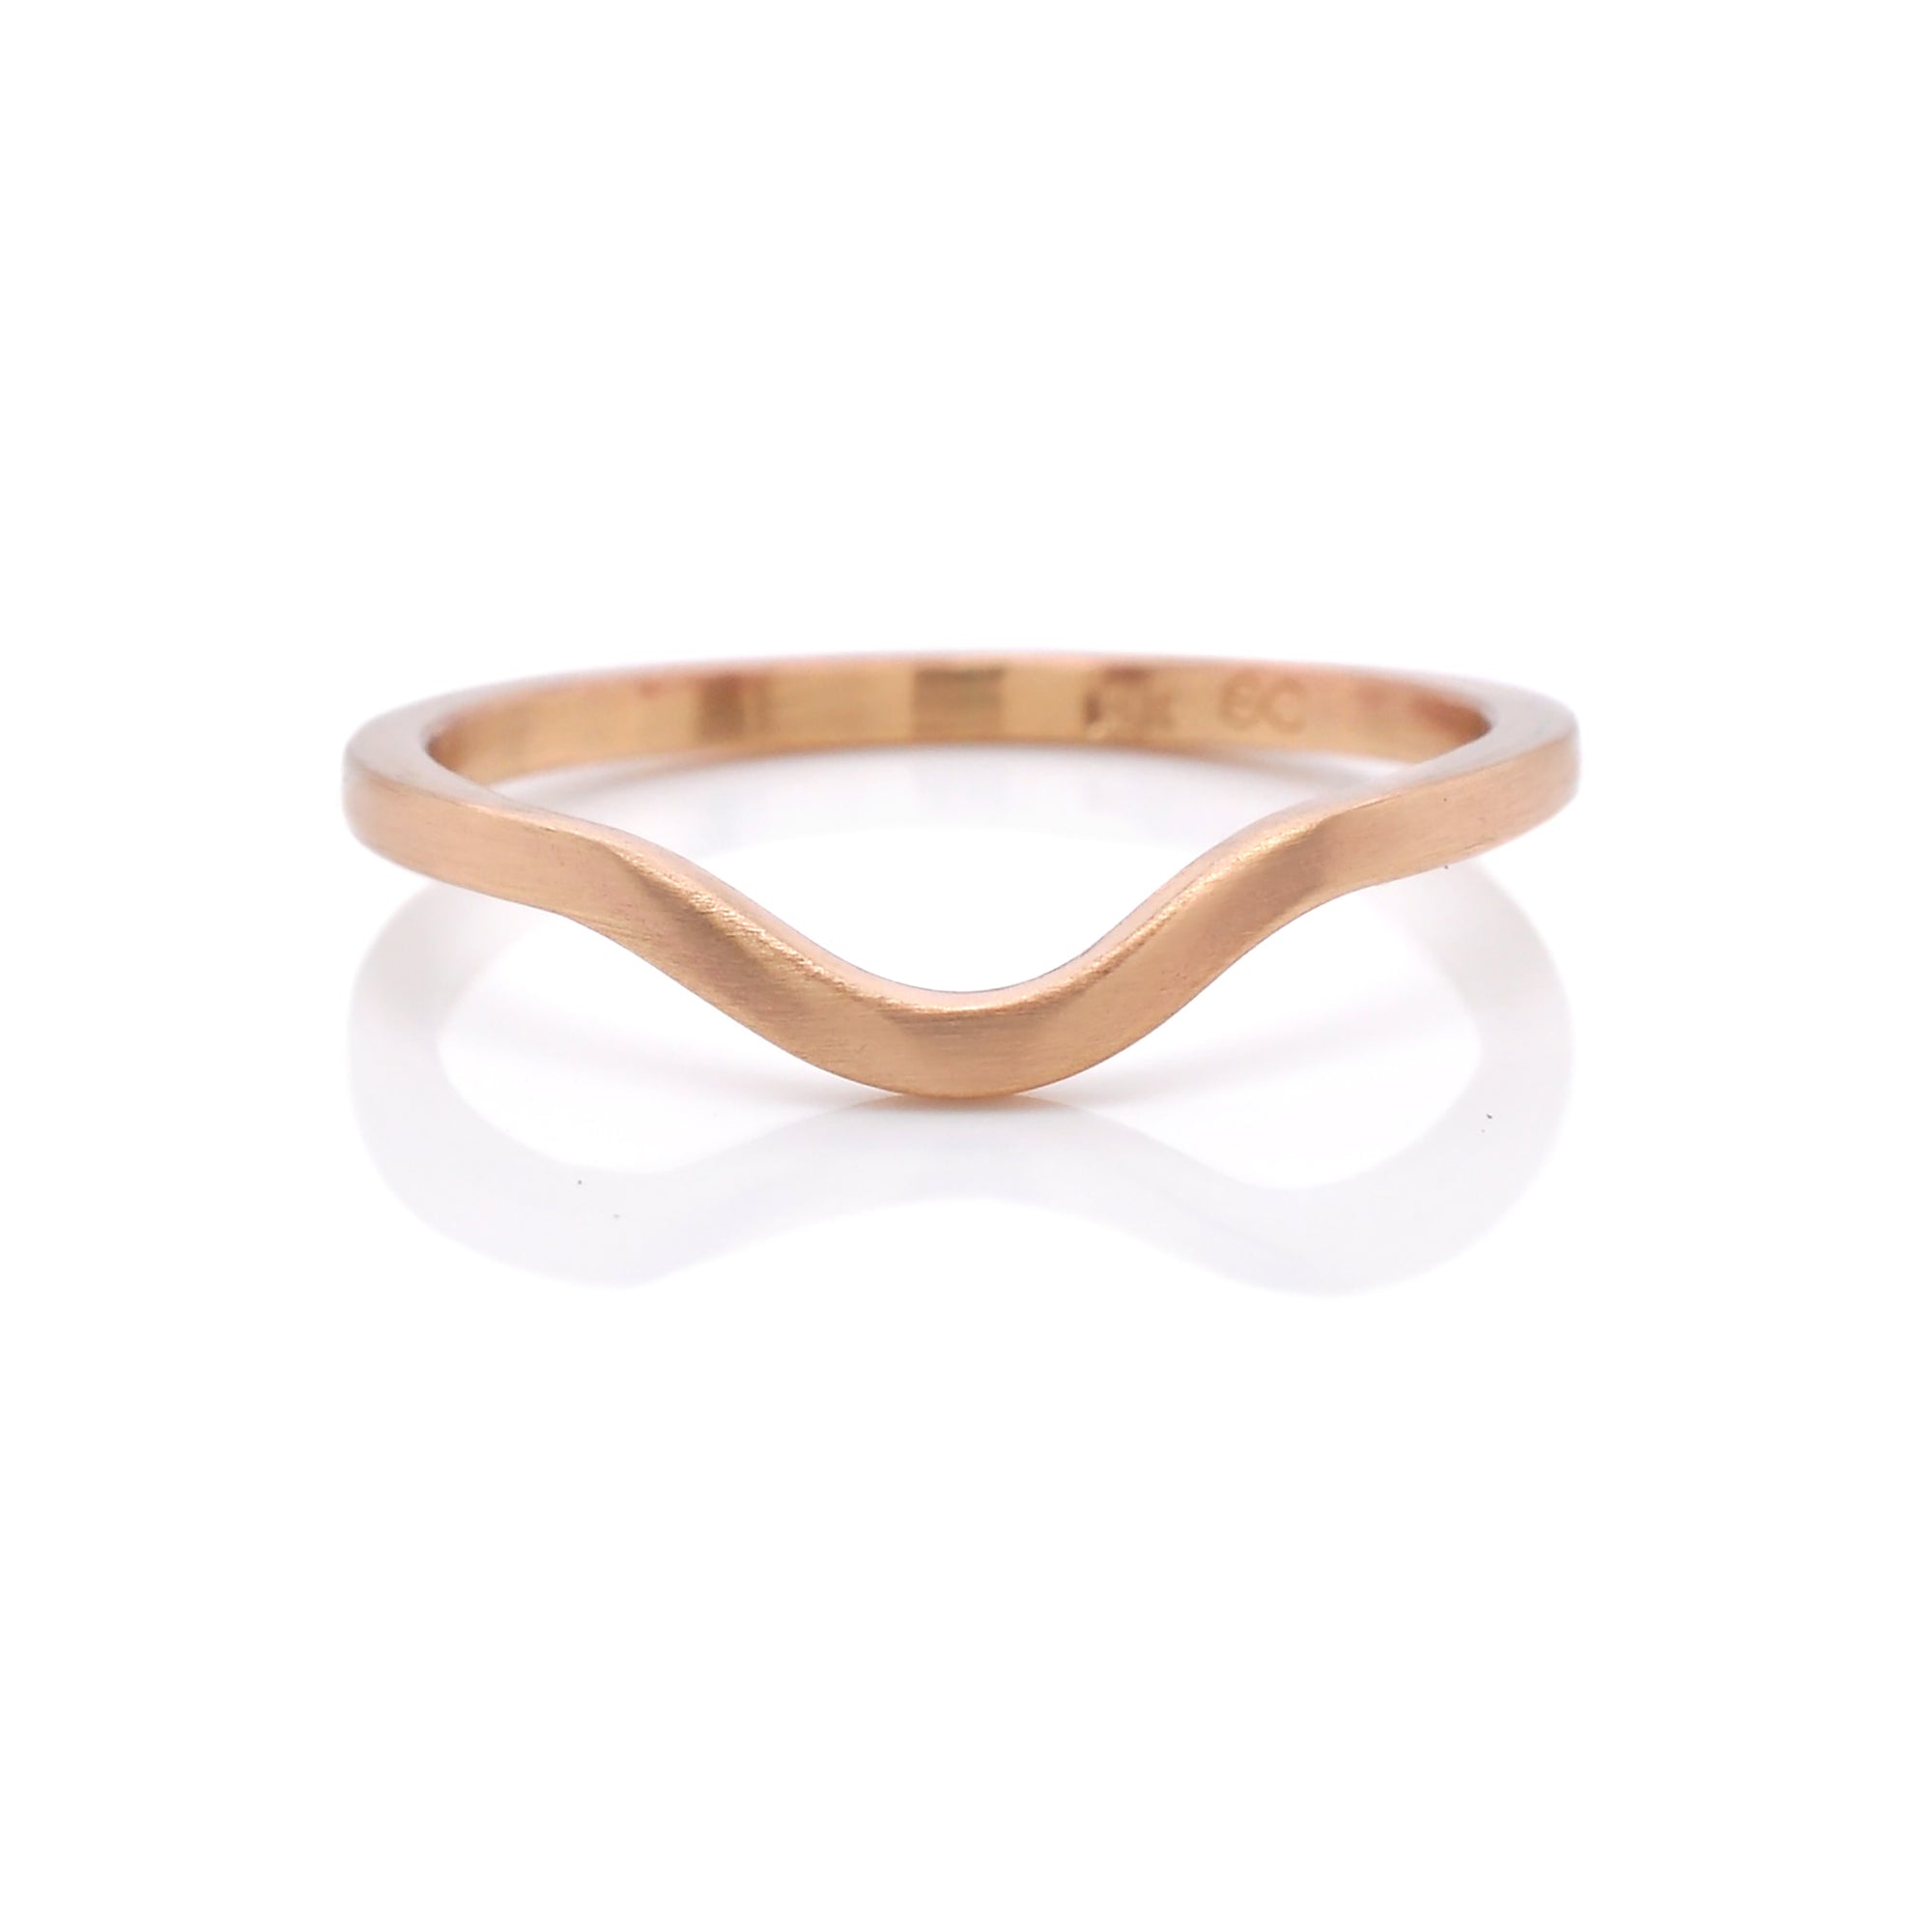 Contour band in satin finished 14k yellow gold. Handmade by EC Design Jewelry in Minneapolis, MN using recycled metal.